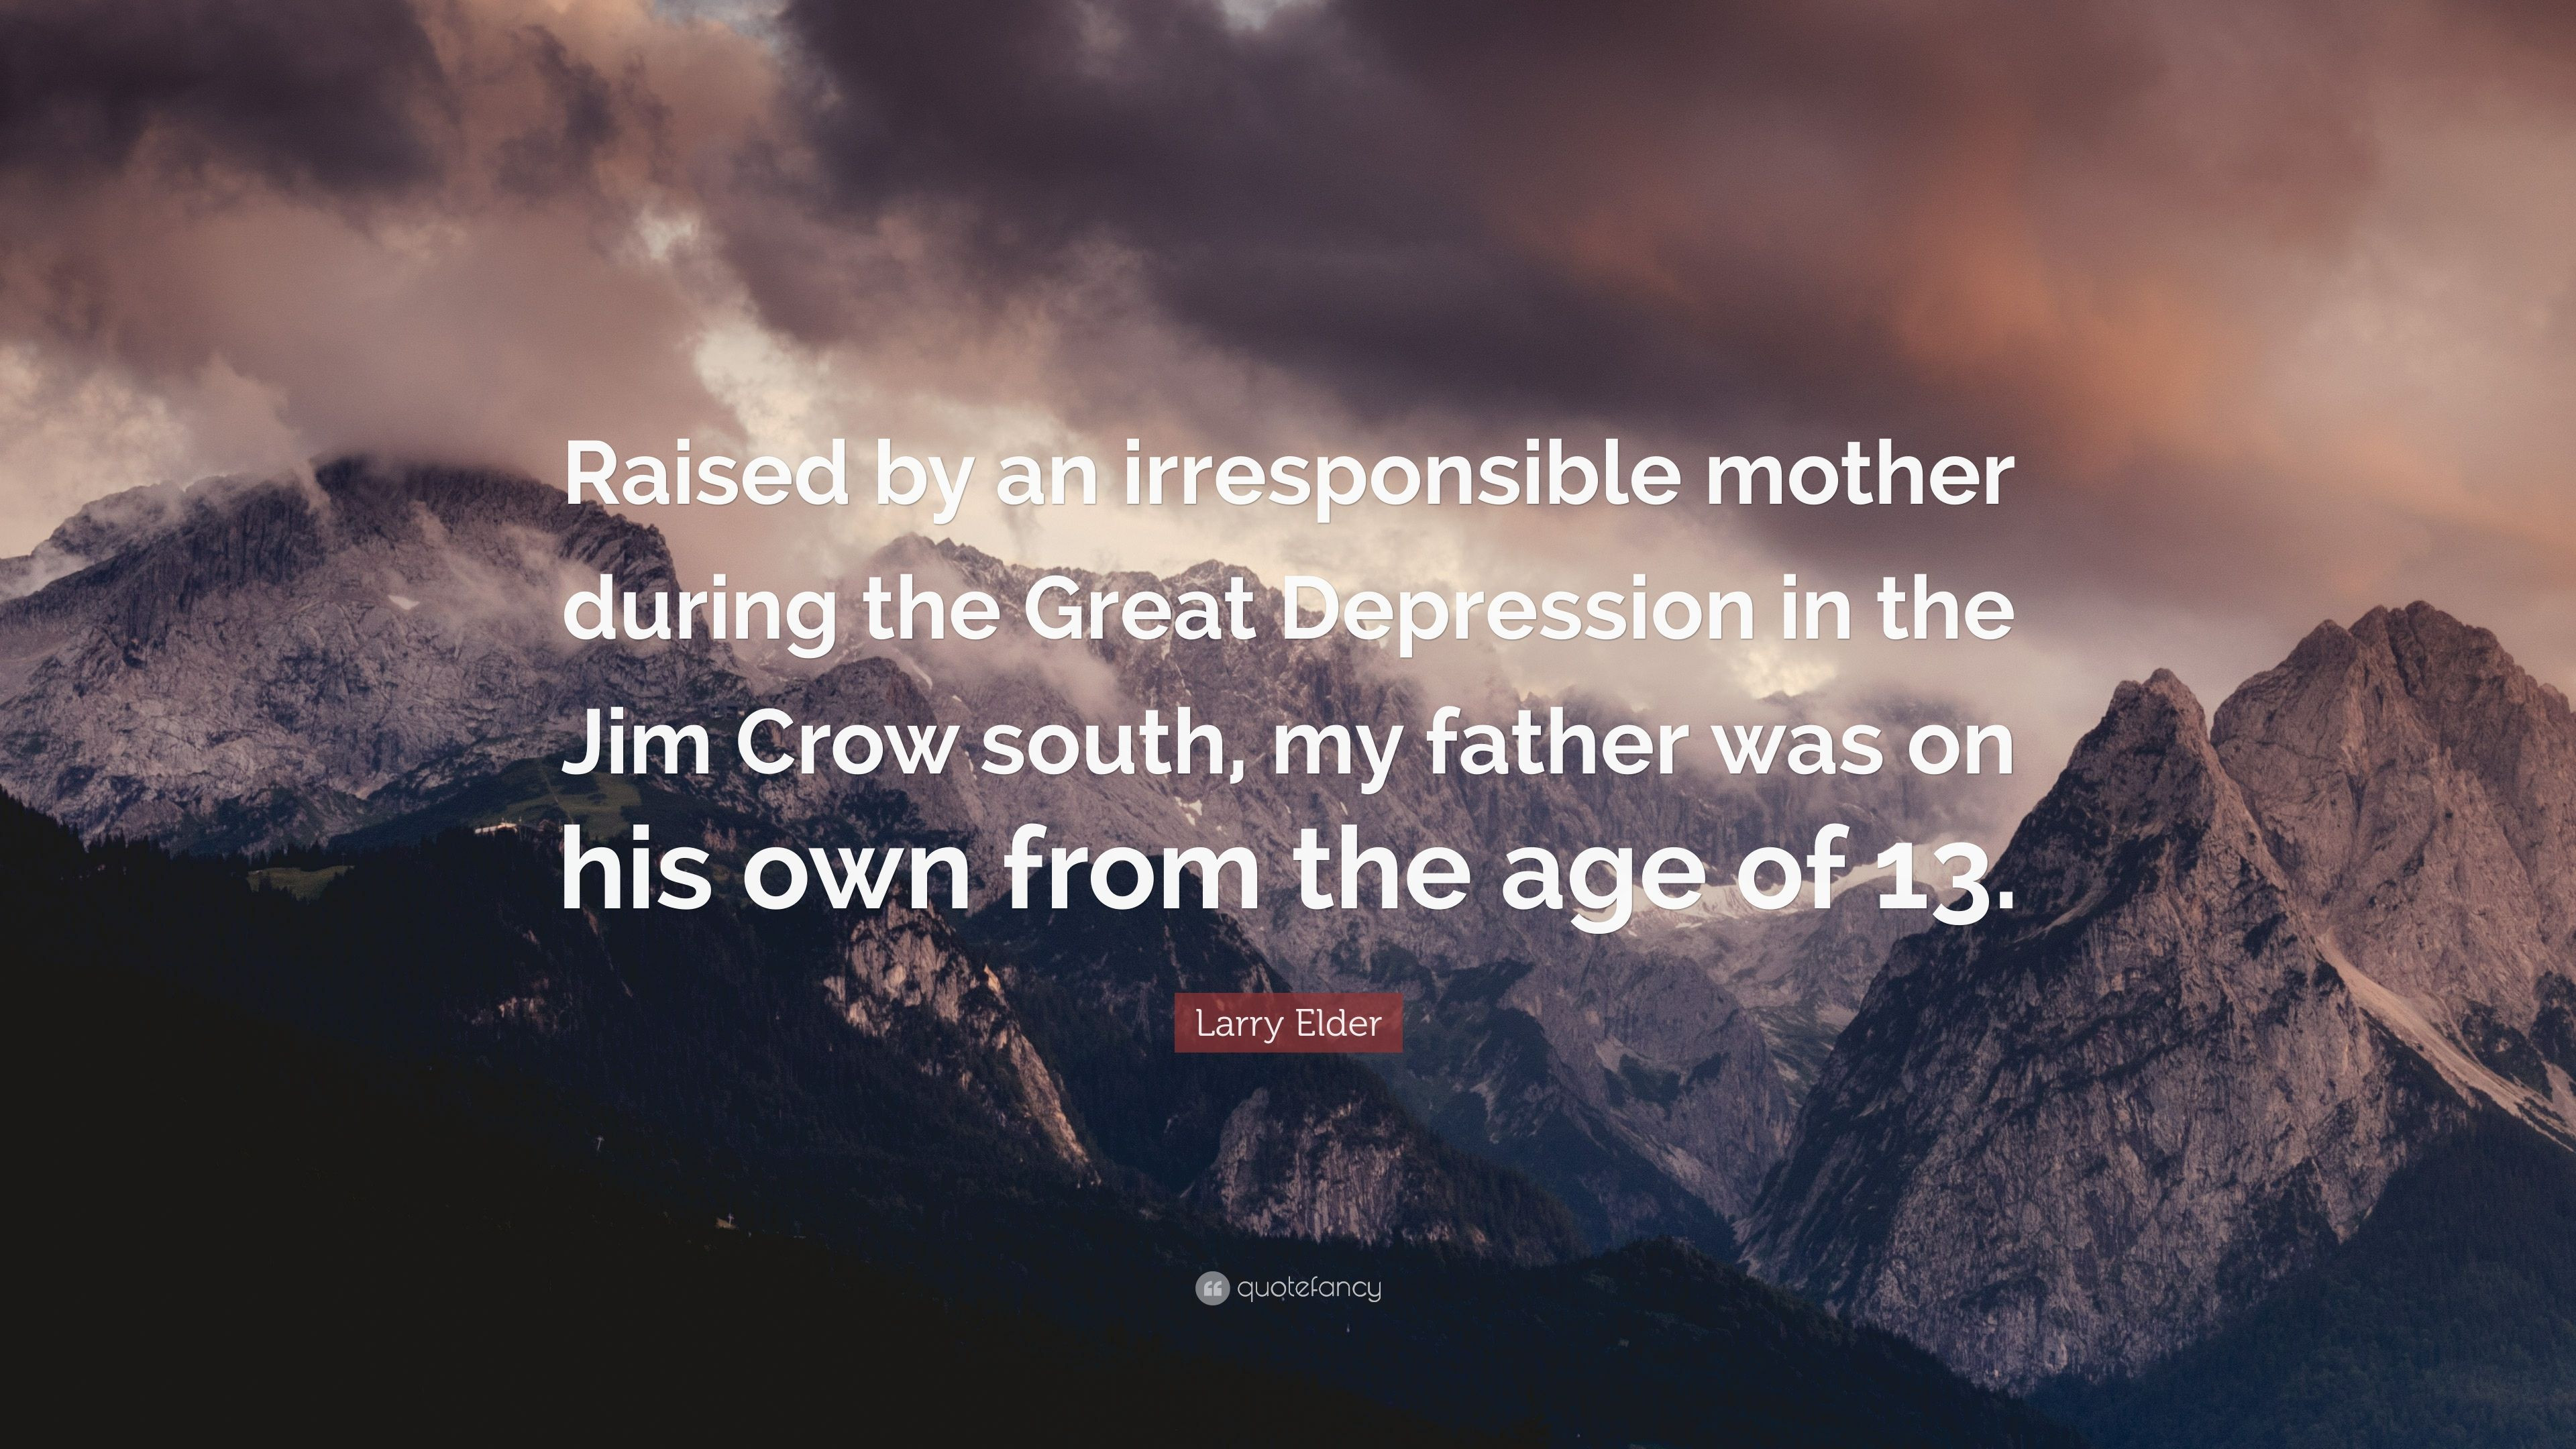 The Crow Mother Quote
 Larry Elder Quote “Raised by an irresponsible mother